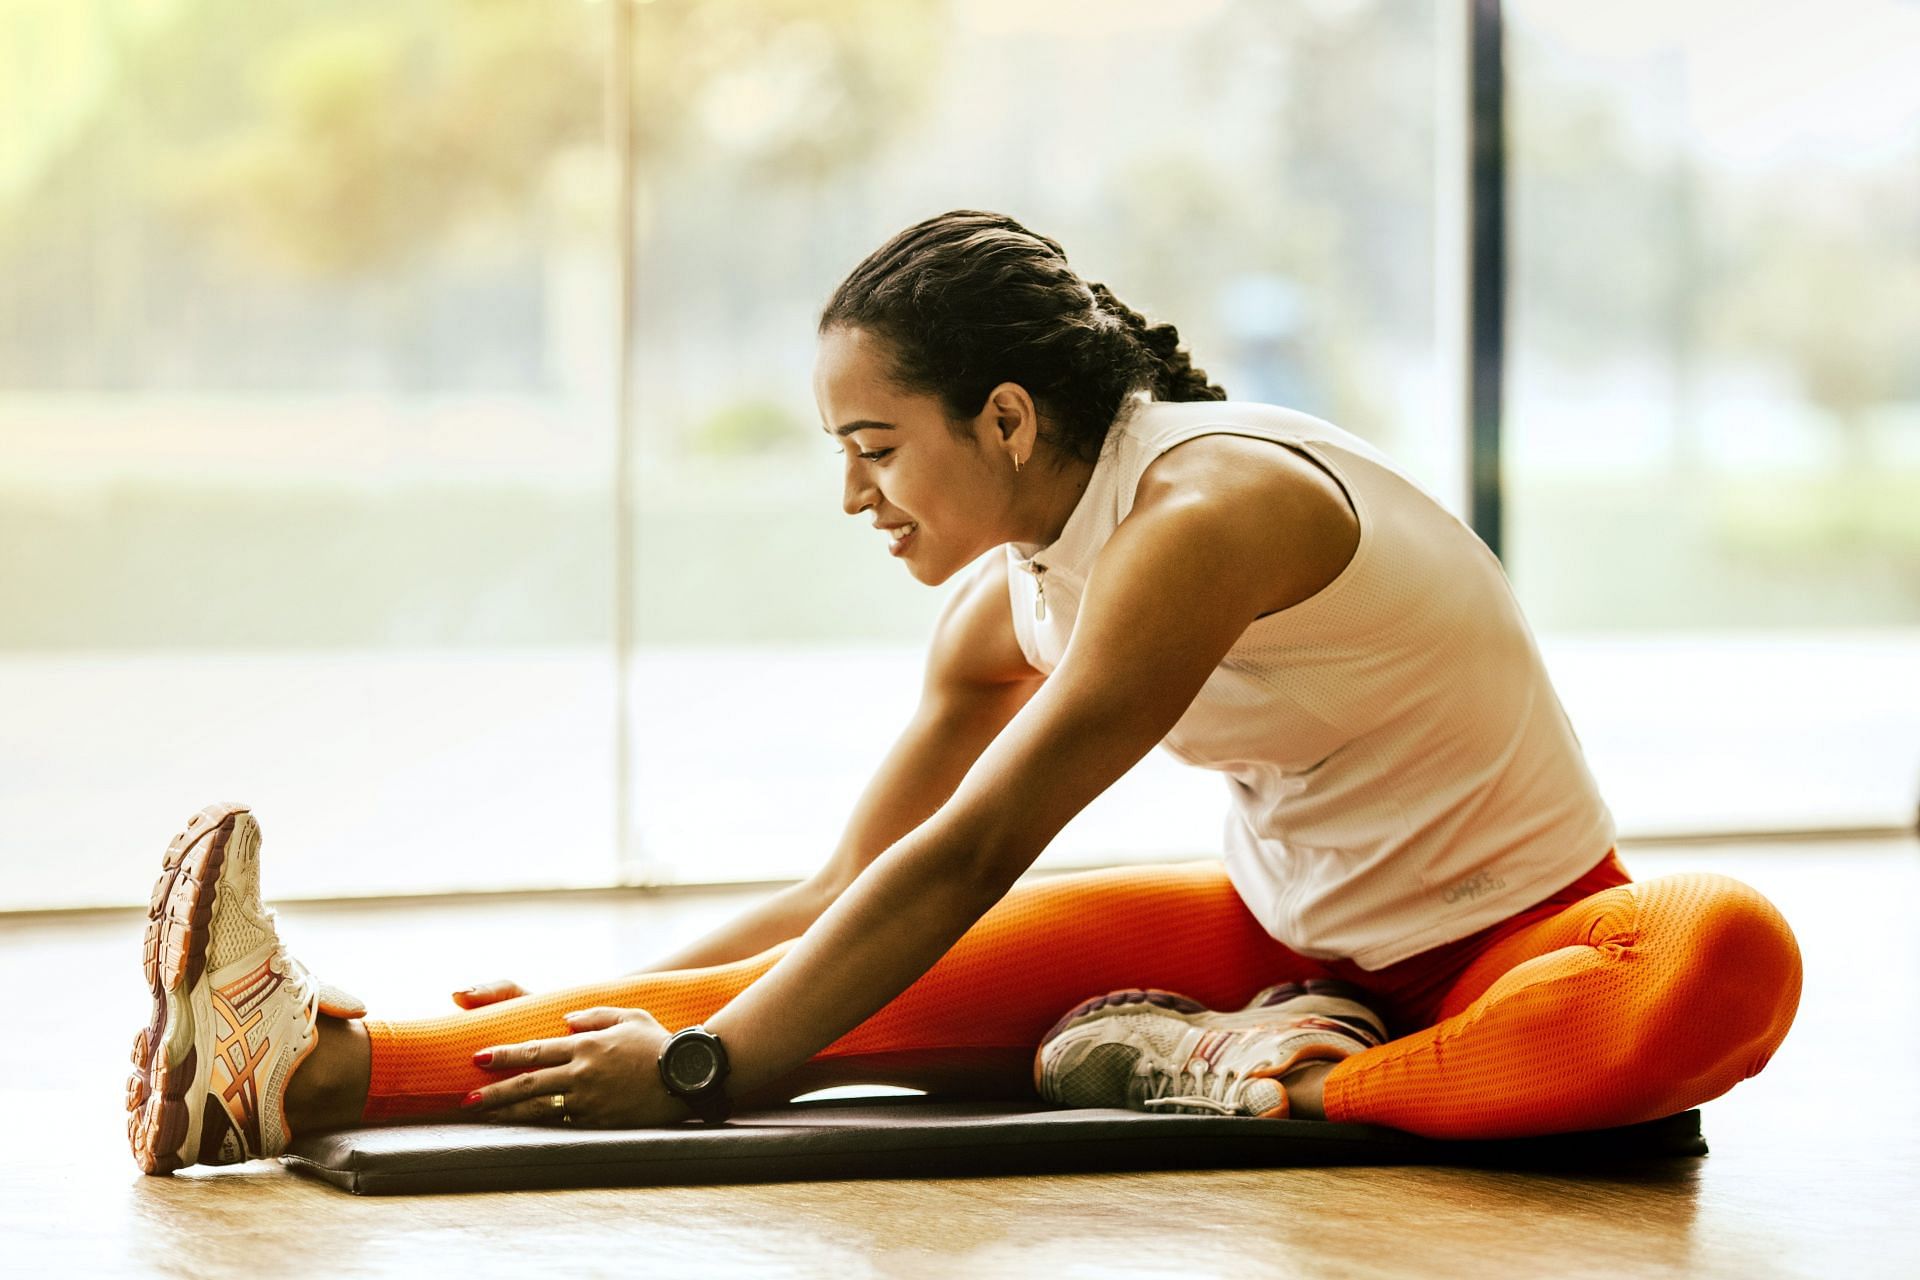 Stretching exercises can help you loosen your tight muscles and relax (Image via Pexels/ Jonathan Borba)